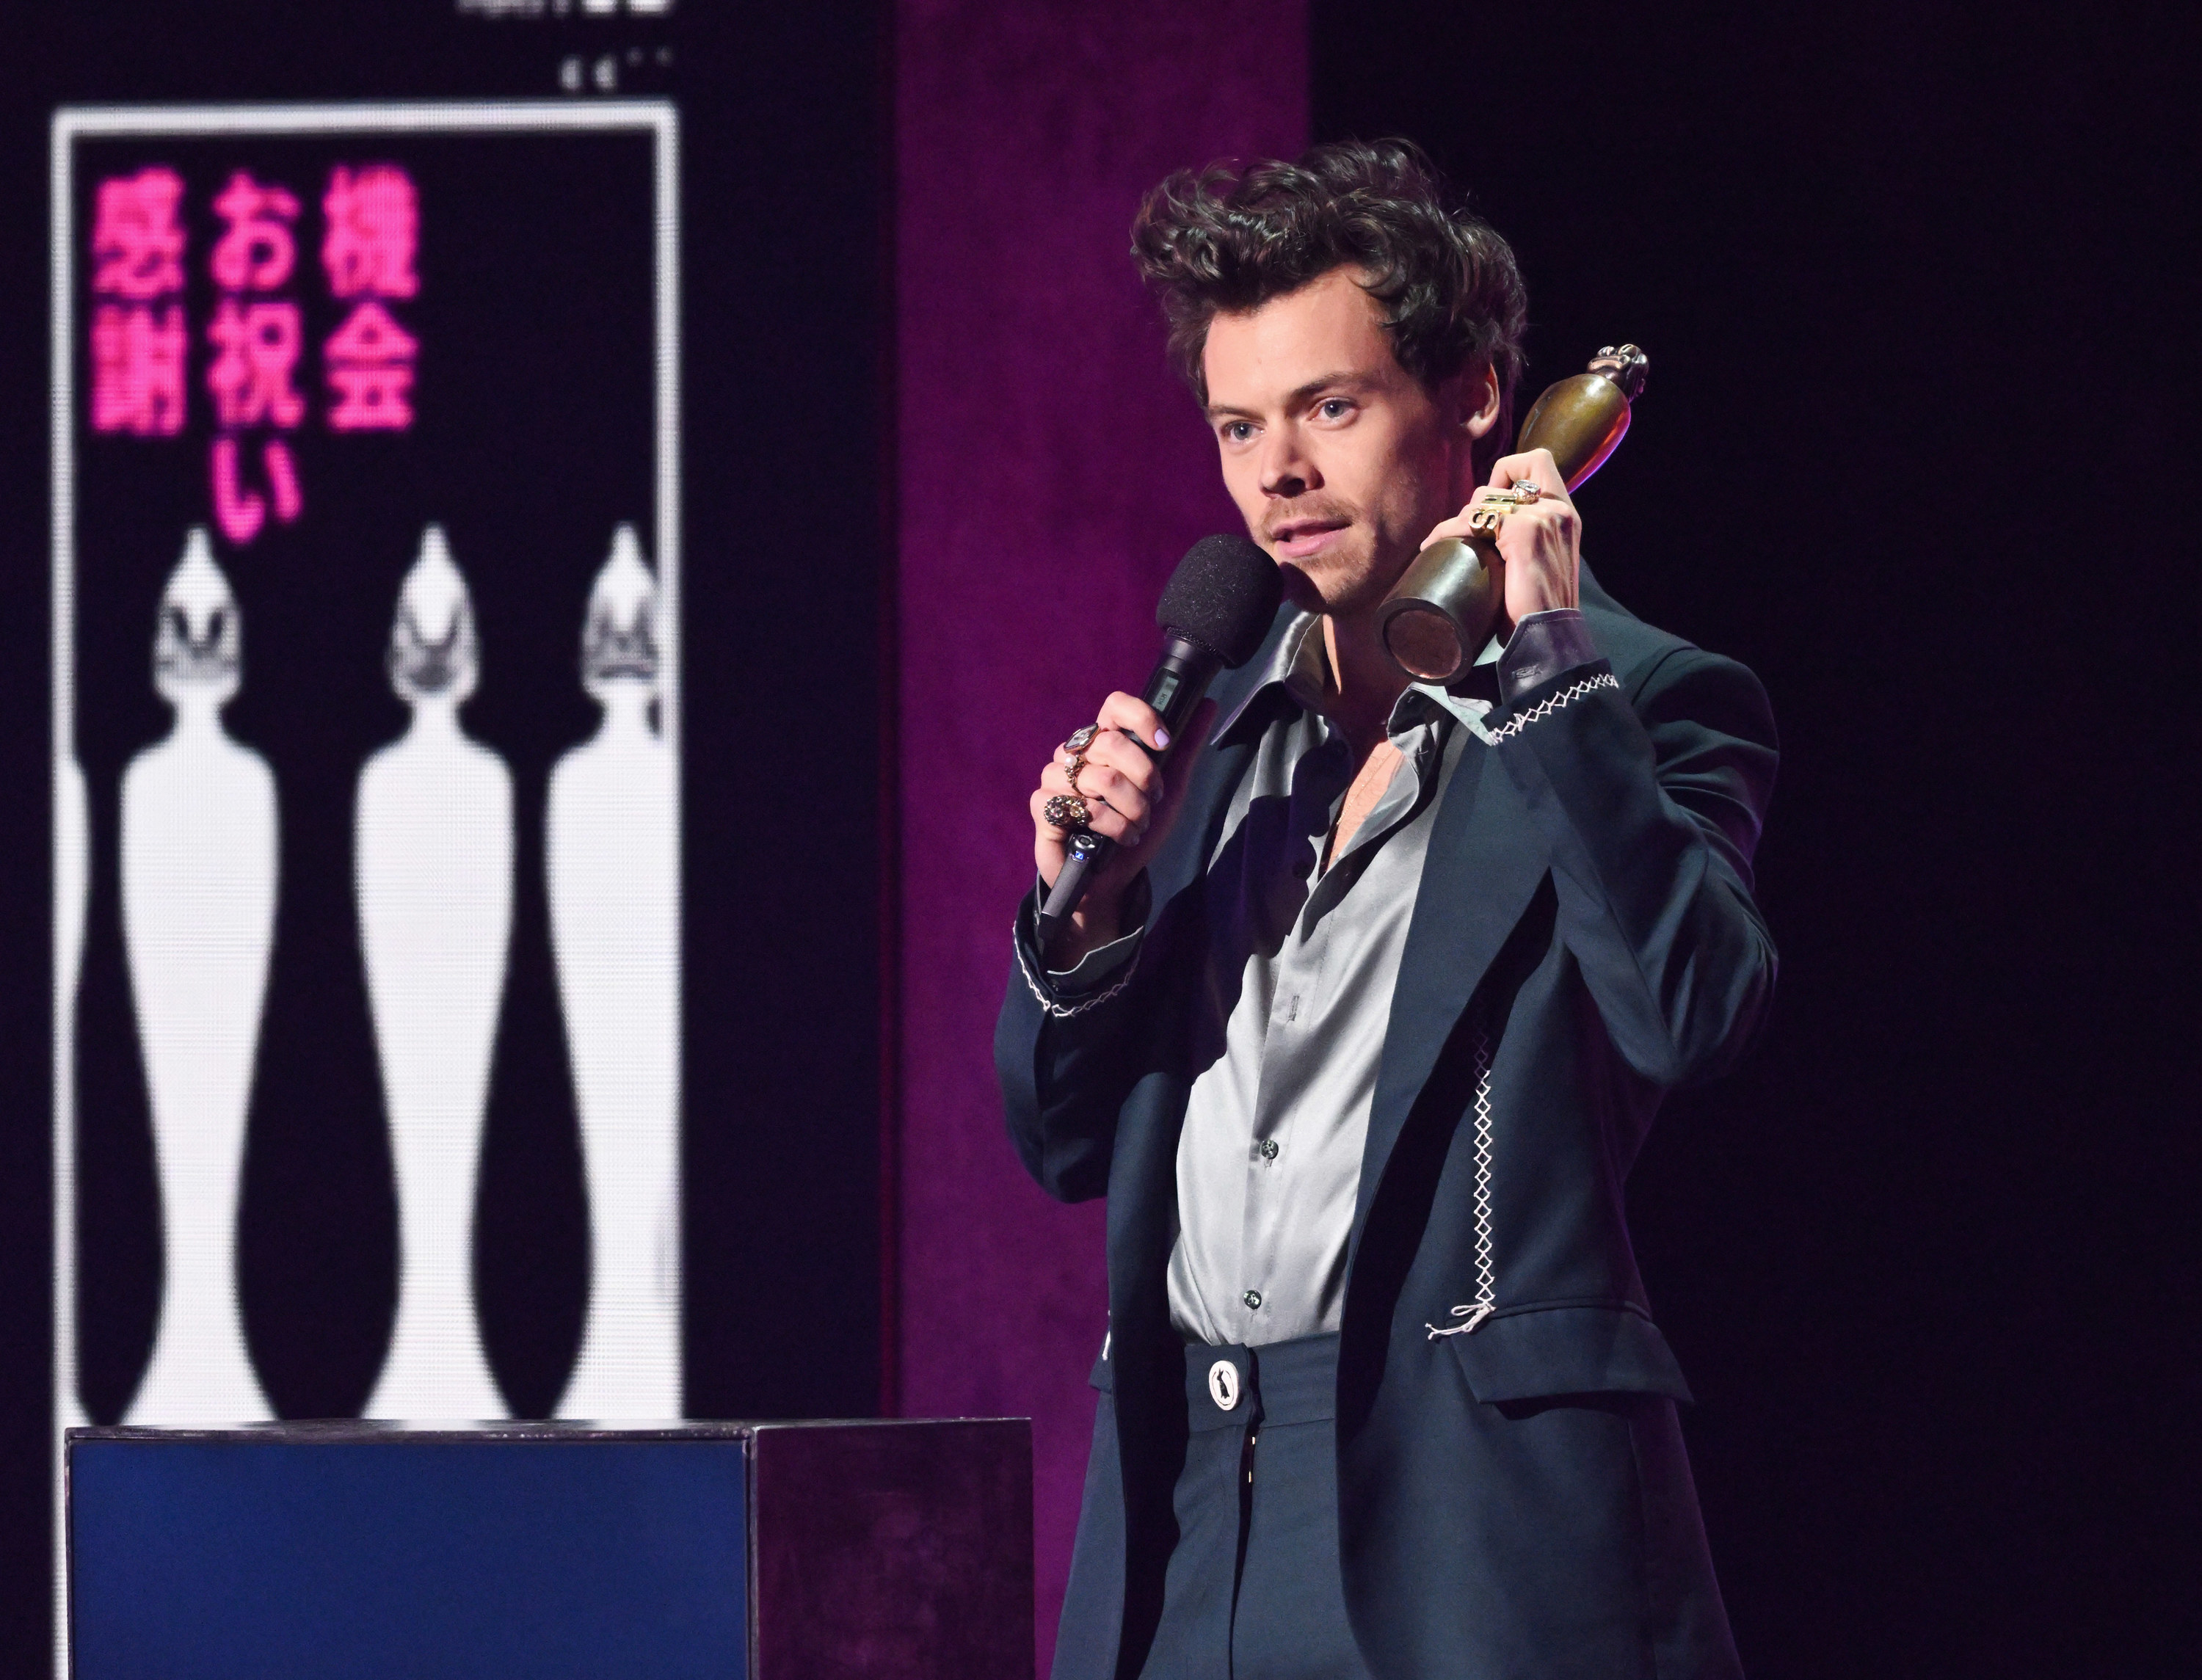 Harry Styles onstage holding a microphone and an award